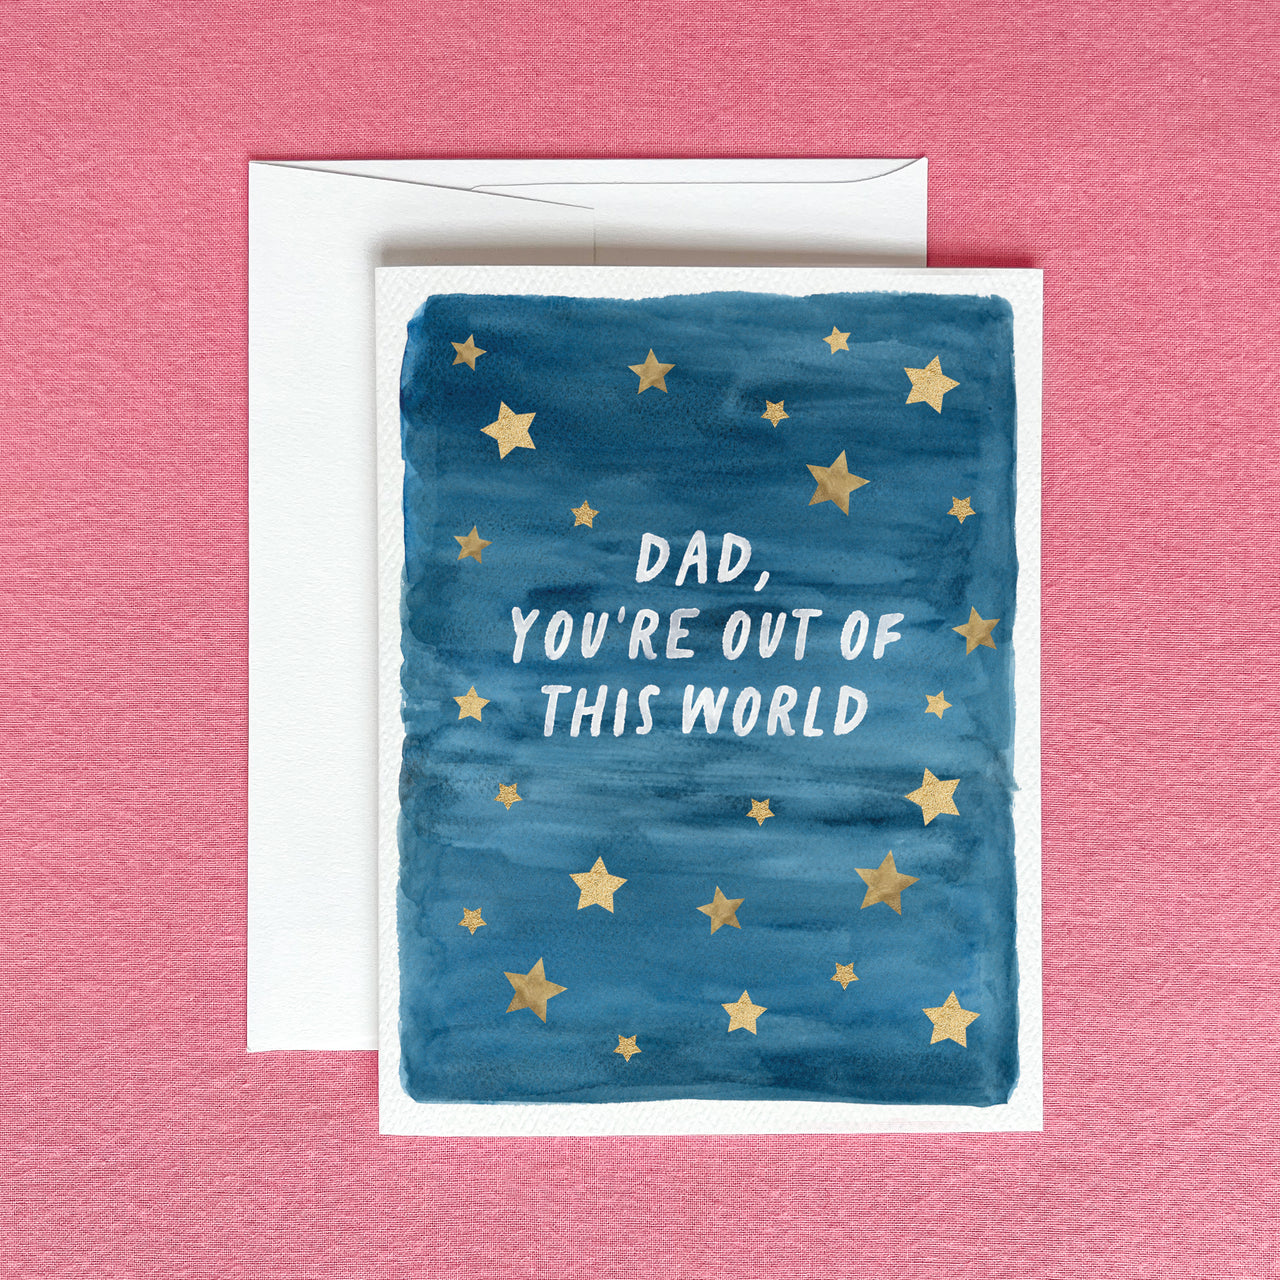 'Dad, You're Out of This World' Greeting Card